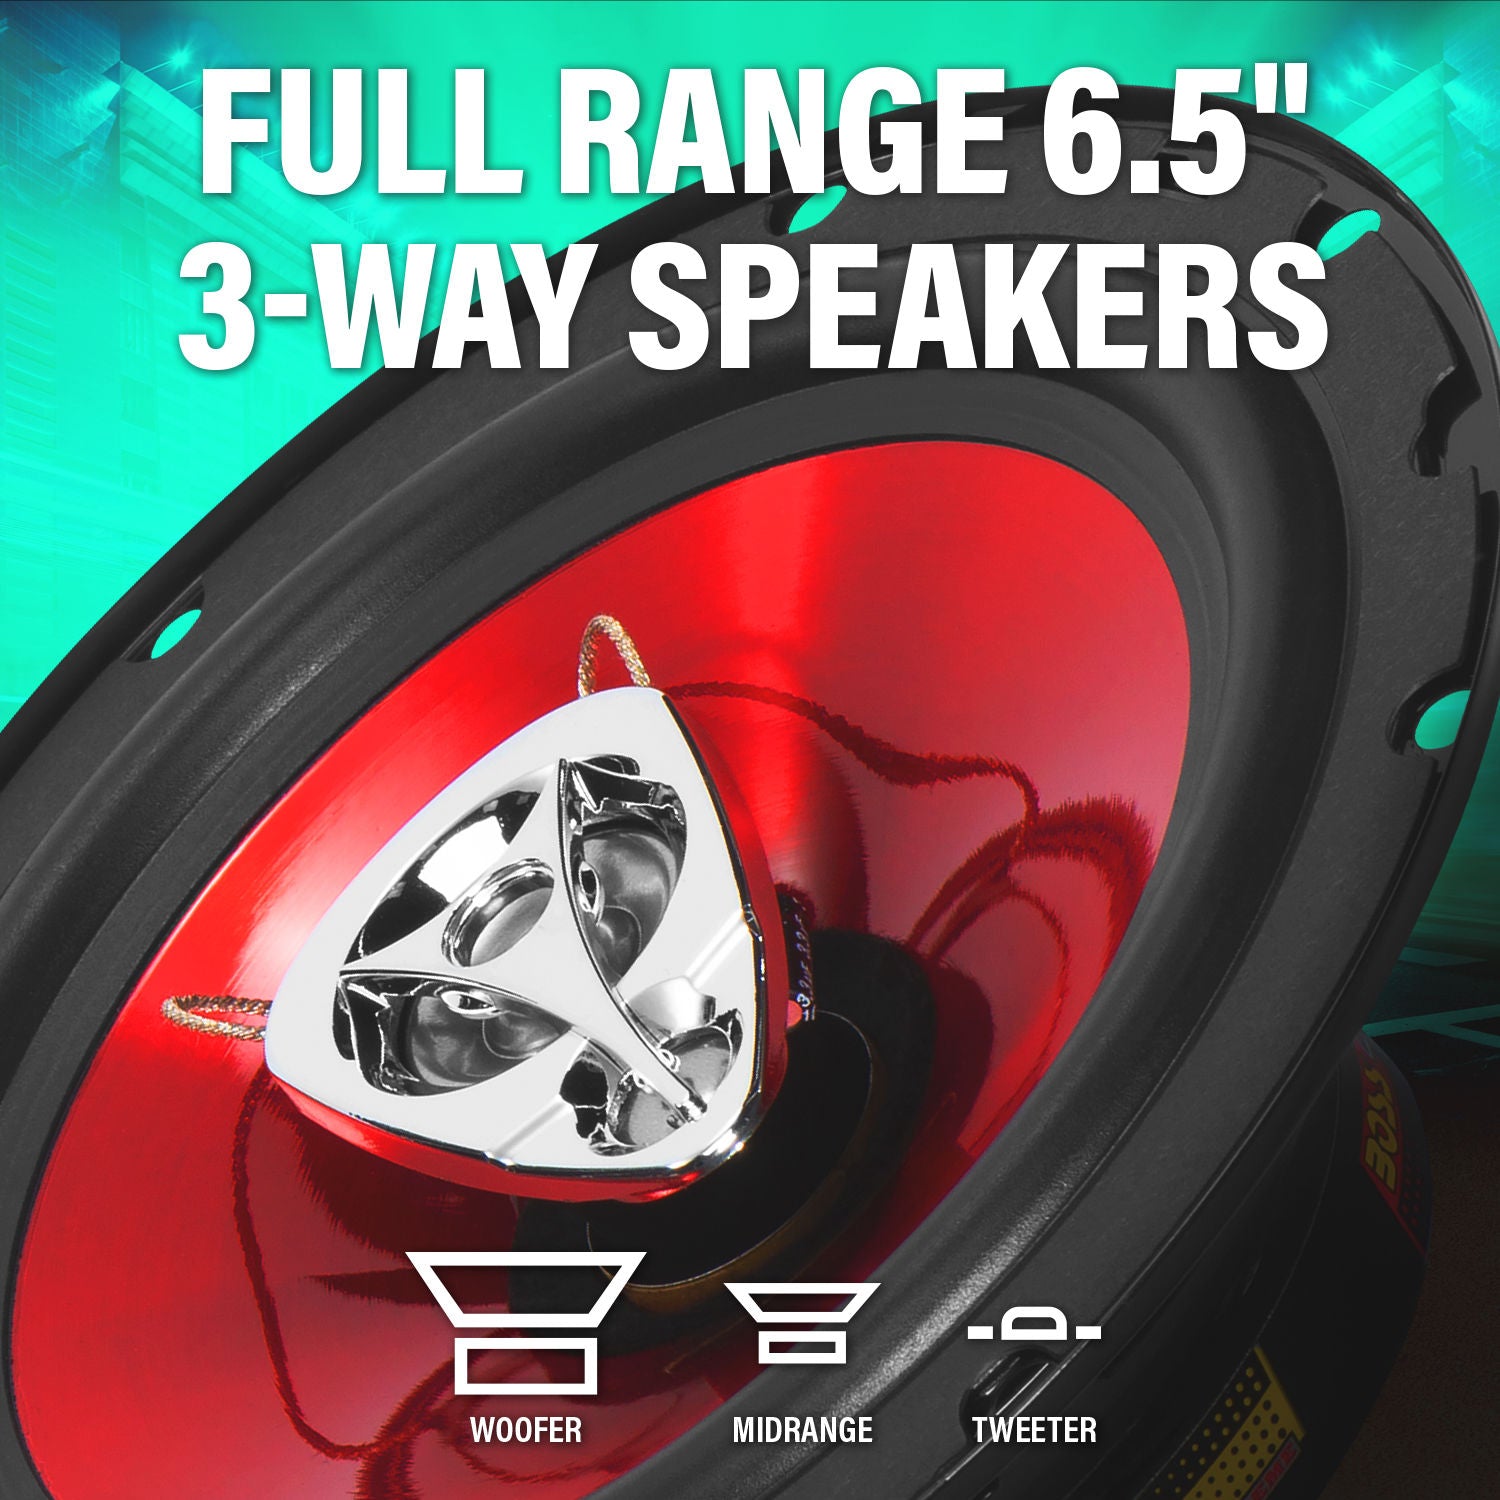 Boss CH6530 - Chaos Exxtreme 6.5" 3-Way 300W Full Range Speakers. (Sold in Pairs)